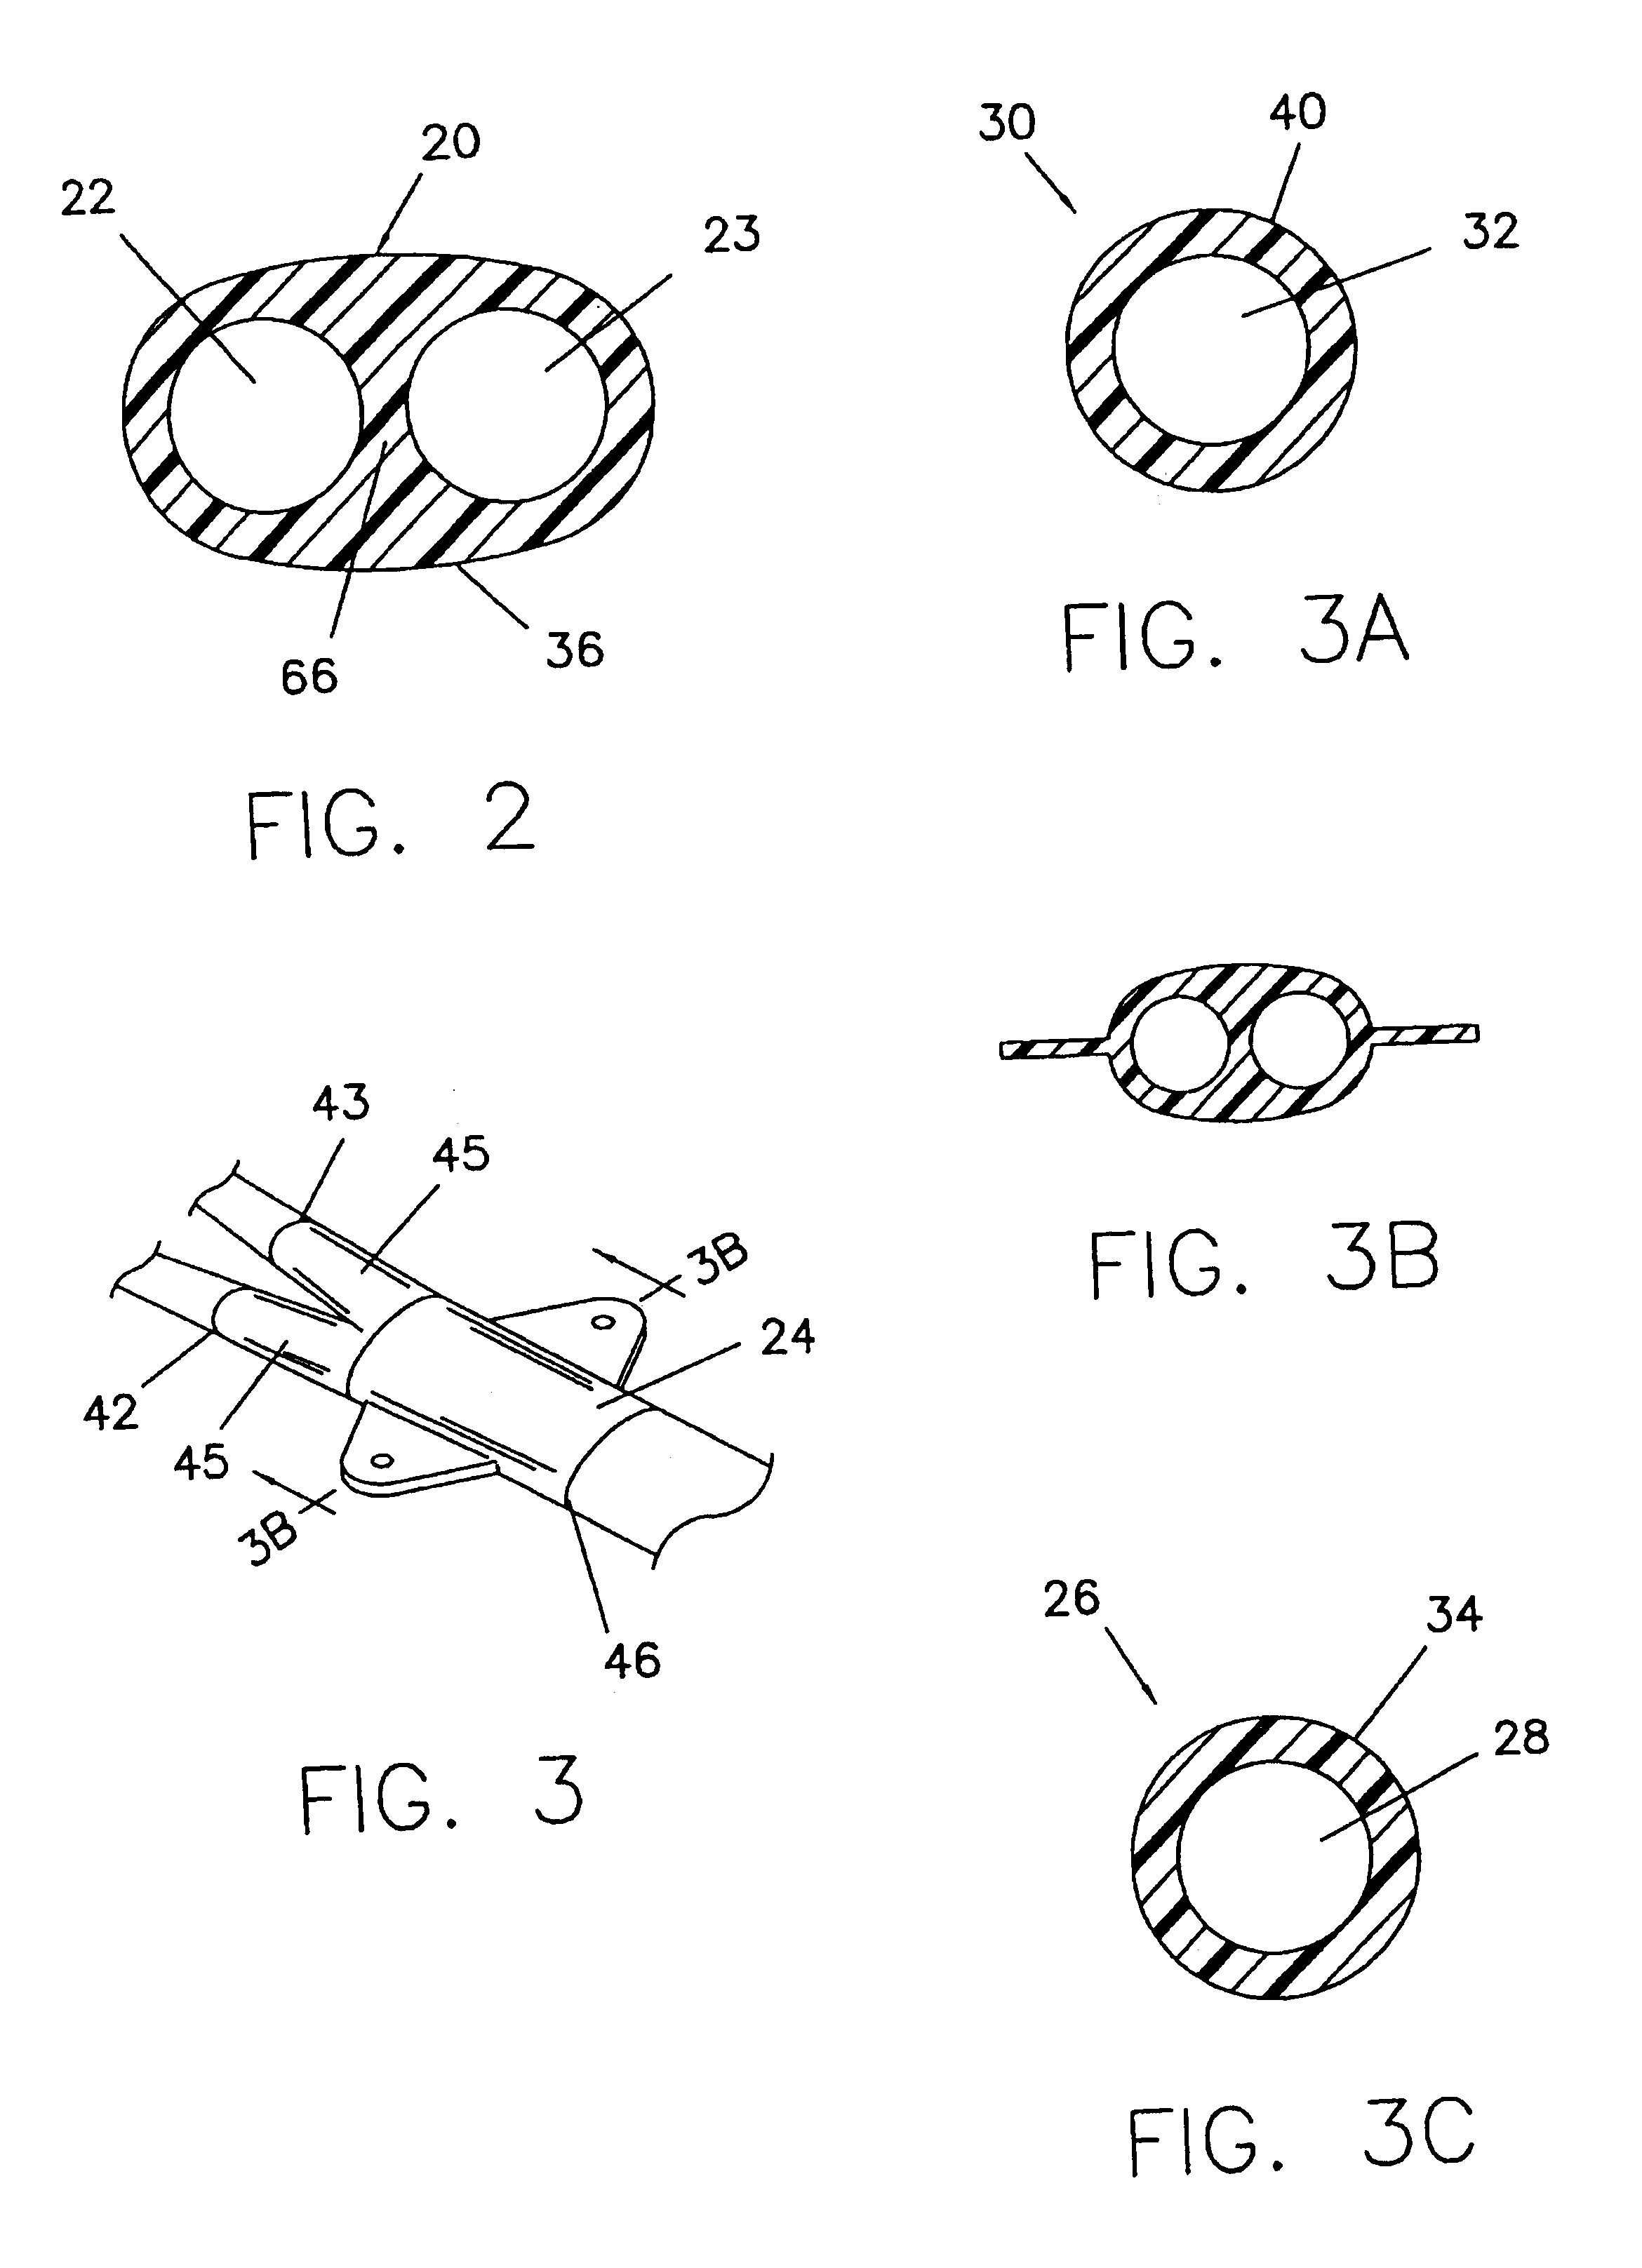 Multilumen catheter assembly and methods for making and inserting the same